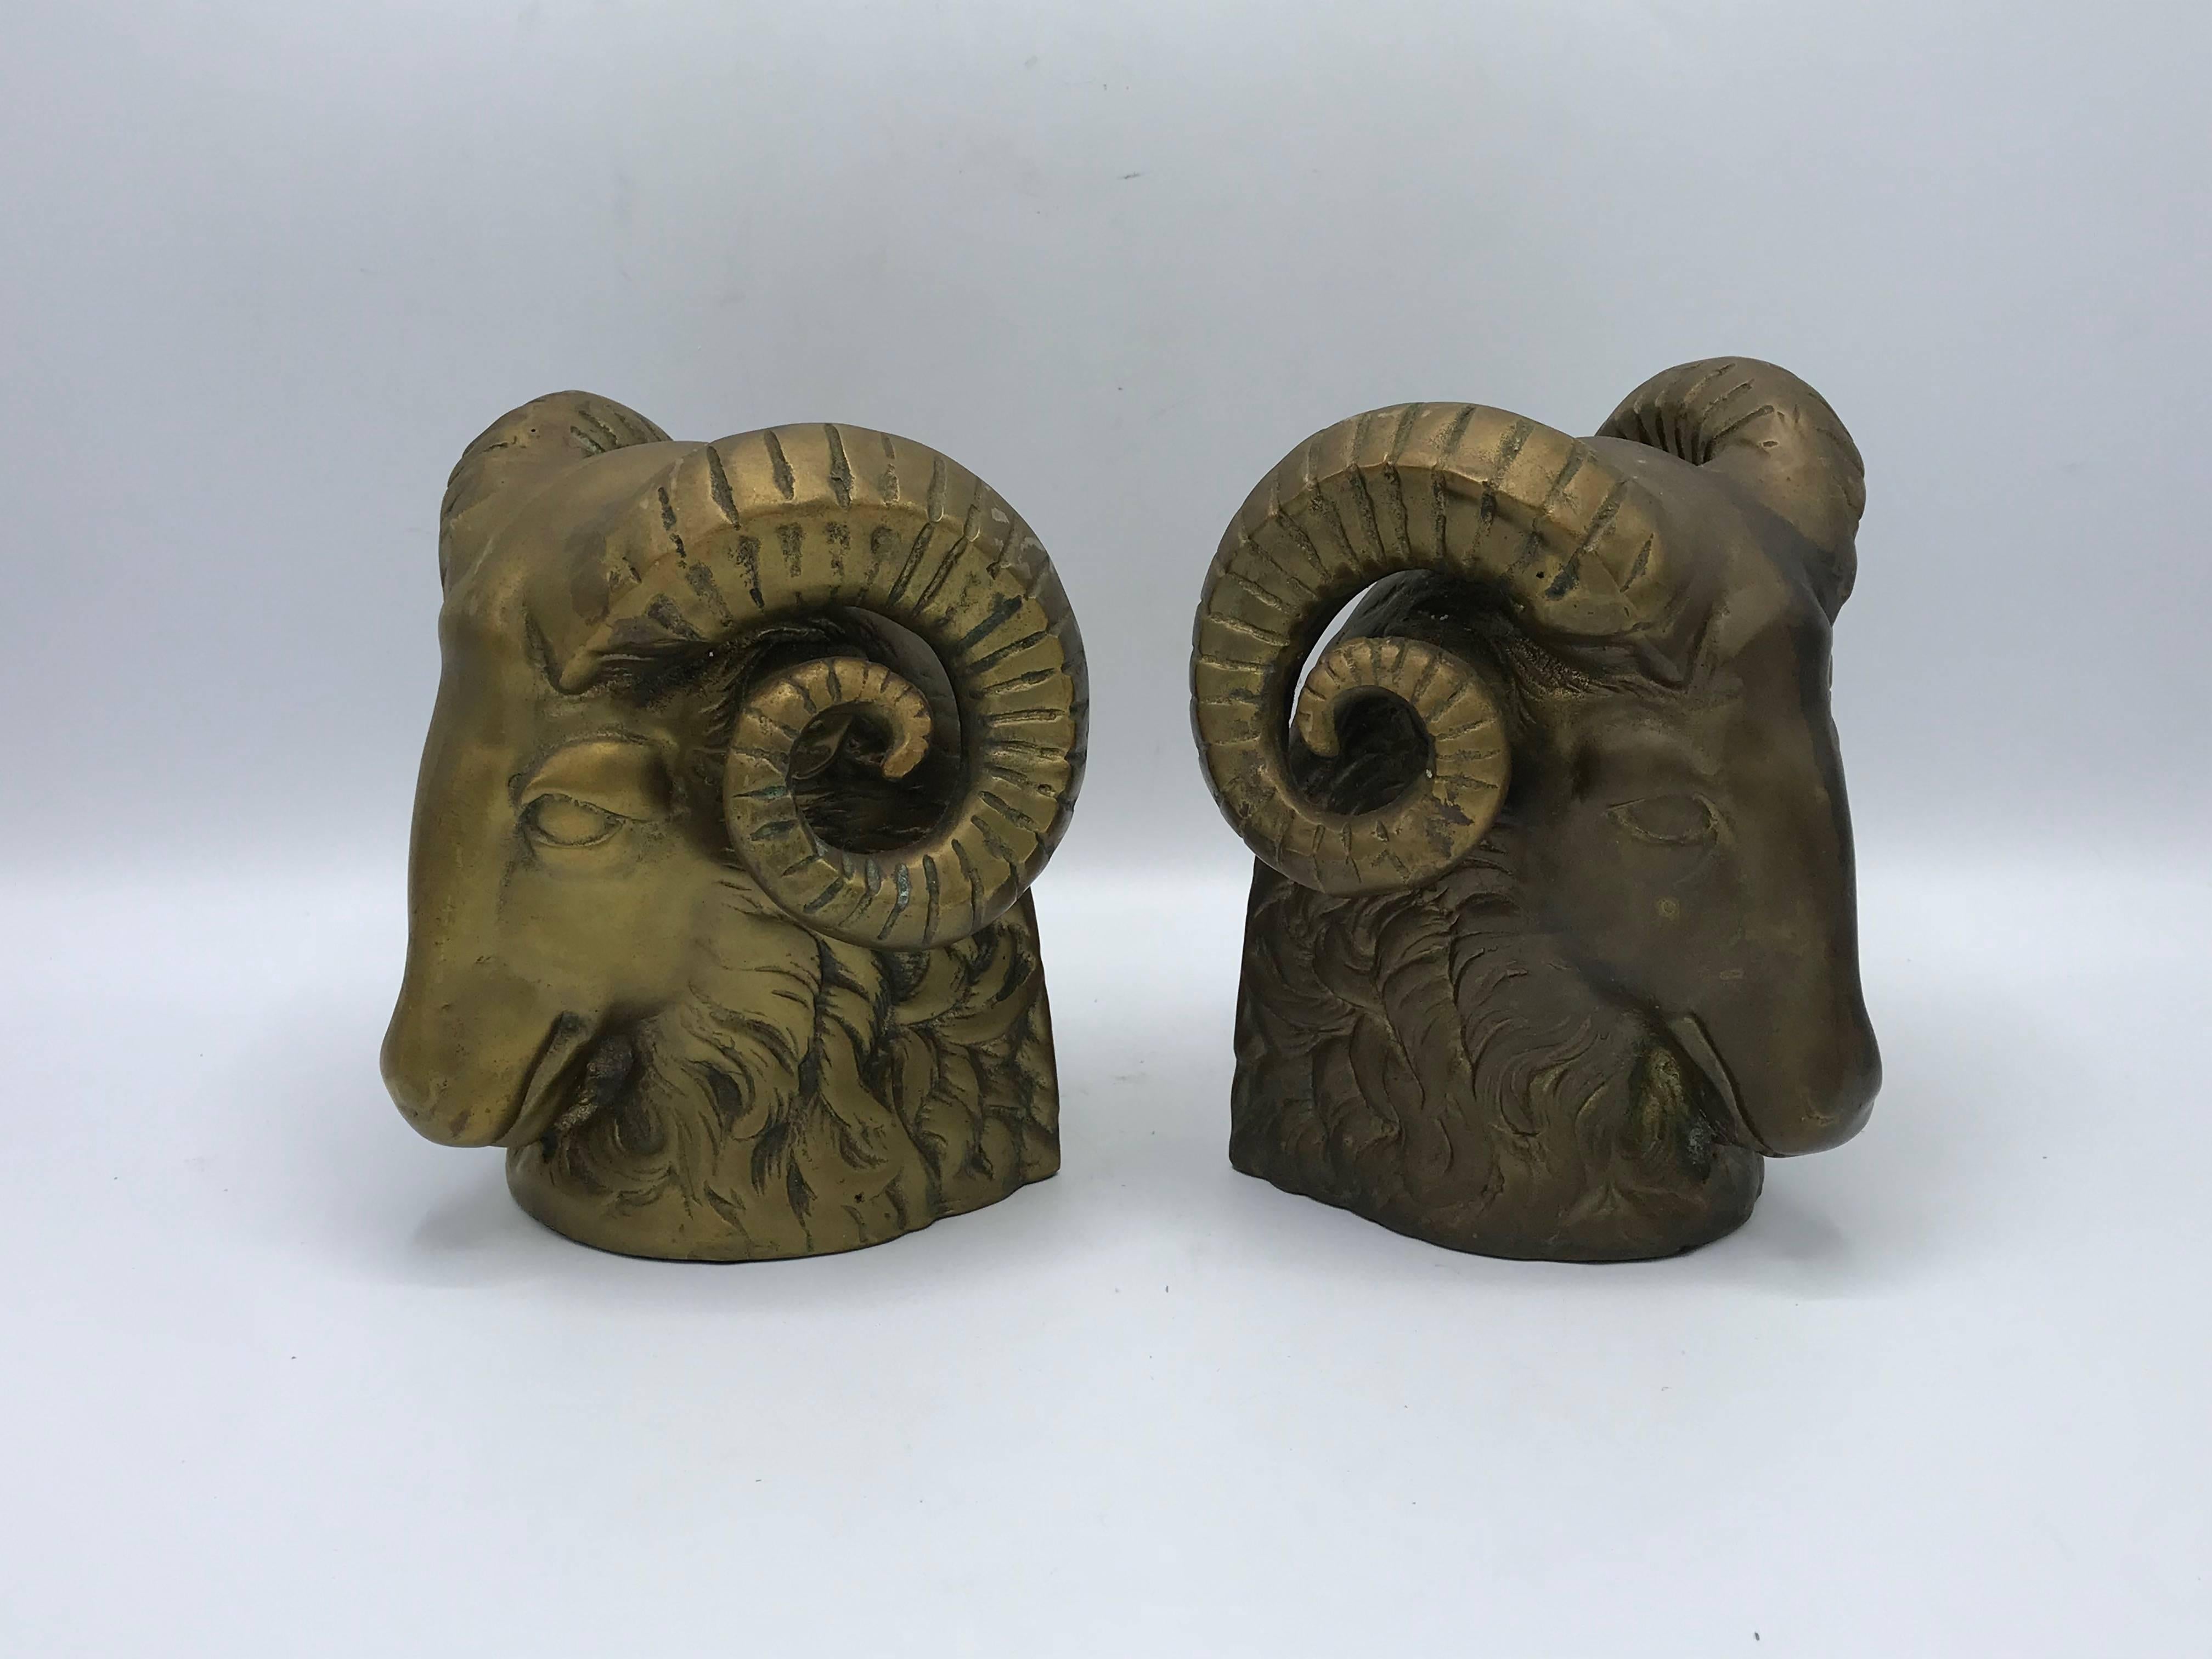 Offered is a pair of 1970s brass ram's head sculpture bookends. Heavy, 6 pounds each.